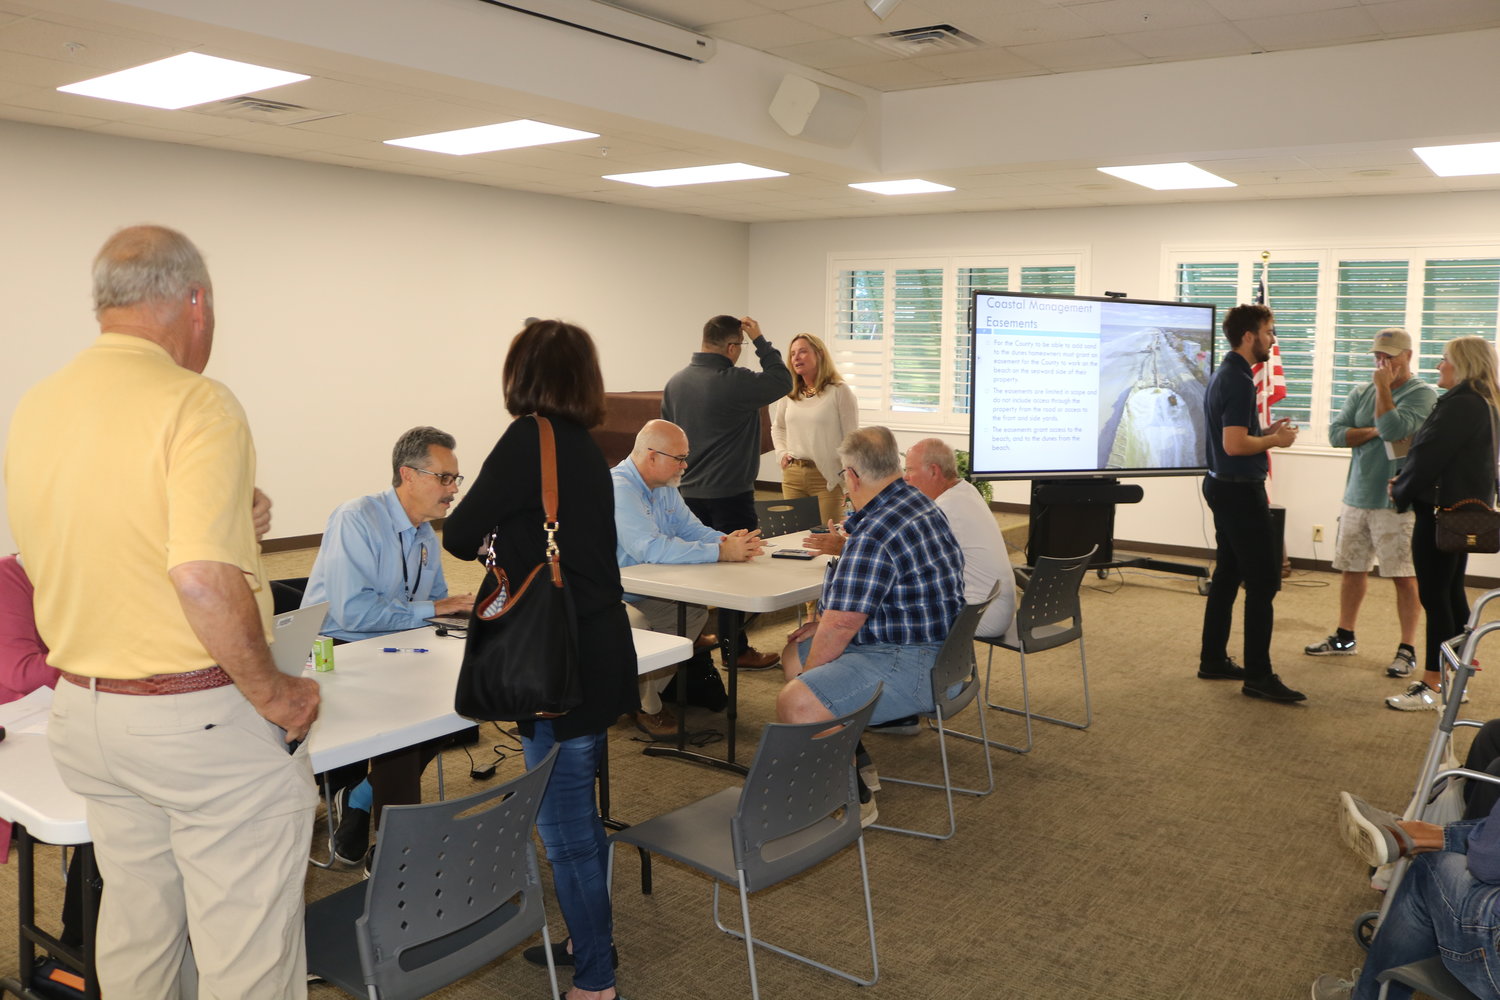 Notaries were on hand during the open house for those oceanside landowners that wanted to go ahead and sign off on the perpetual easements.